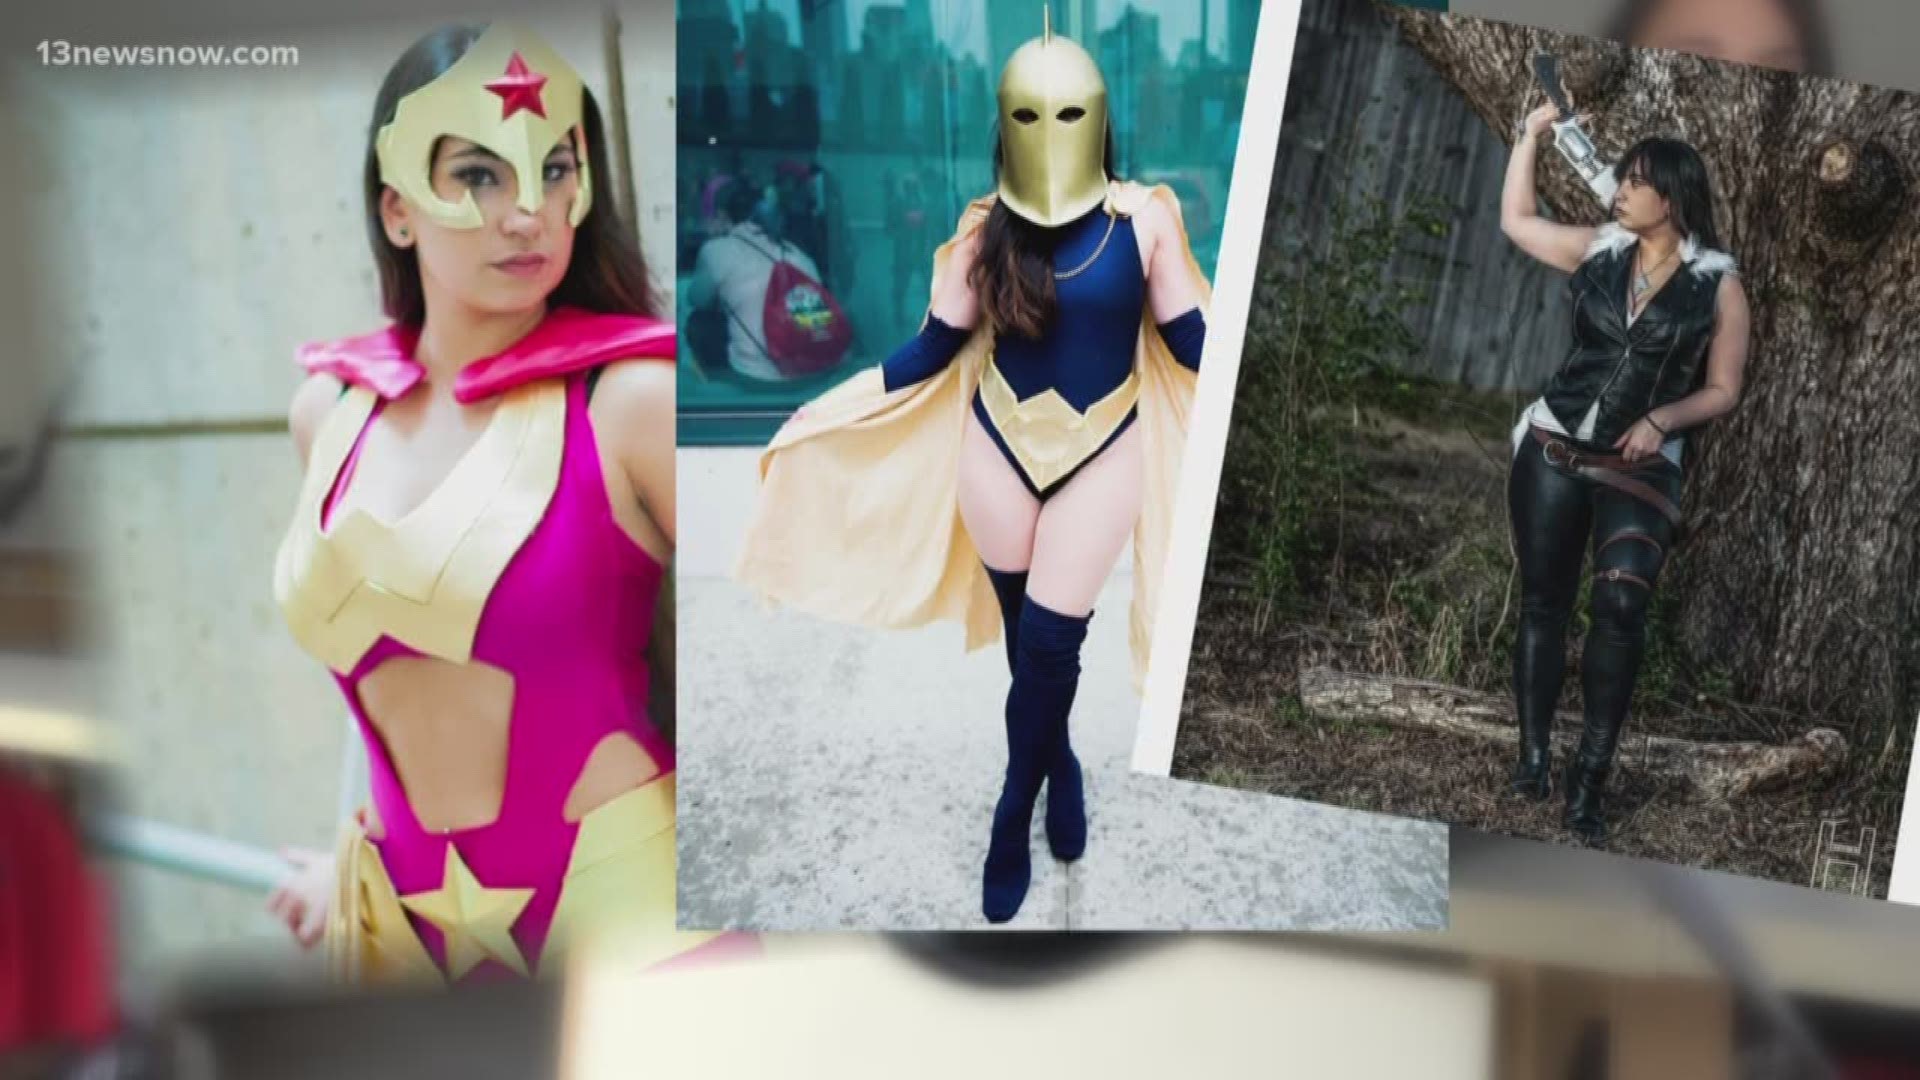 Christina Rhodes is a seamstress at heart but she's also a big fan of cosplay, short for costume play.